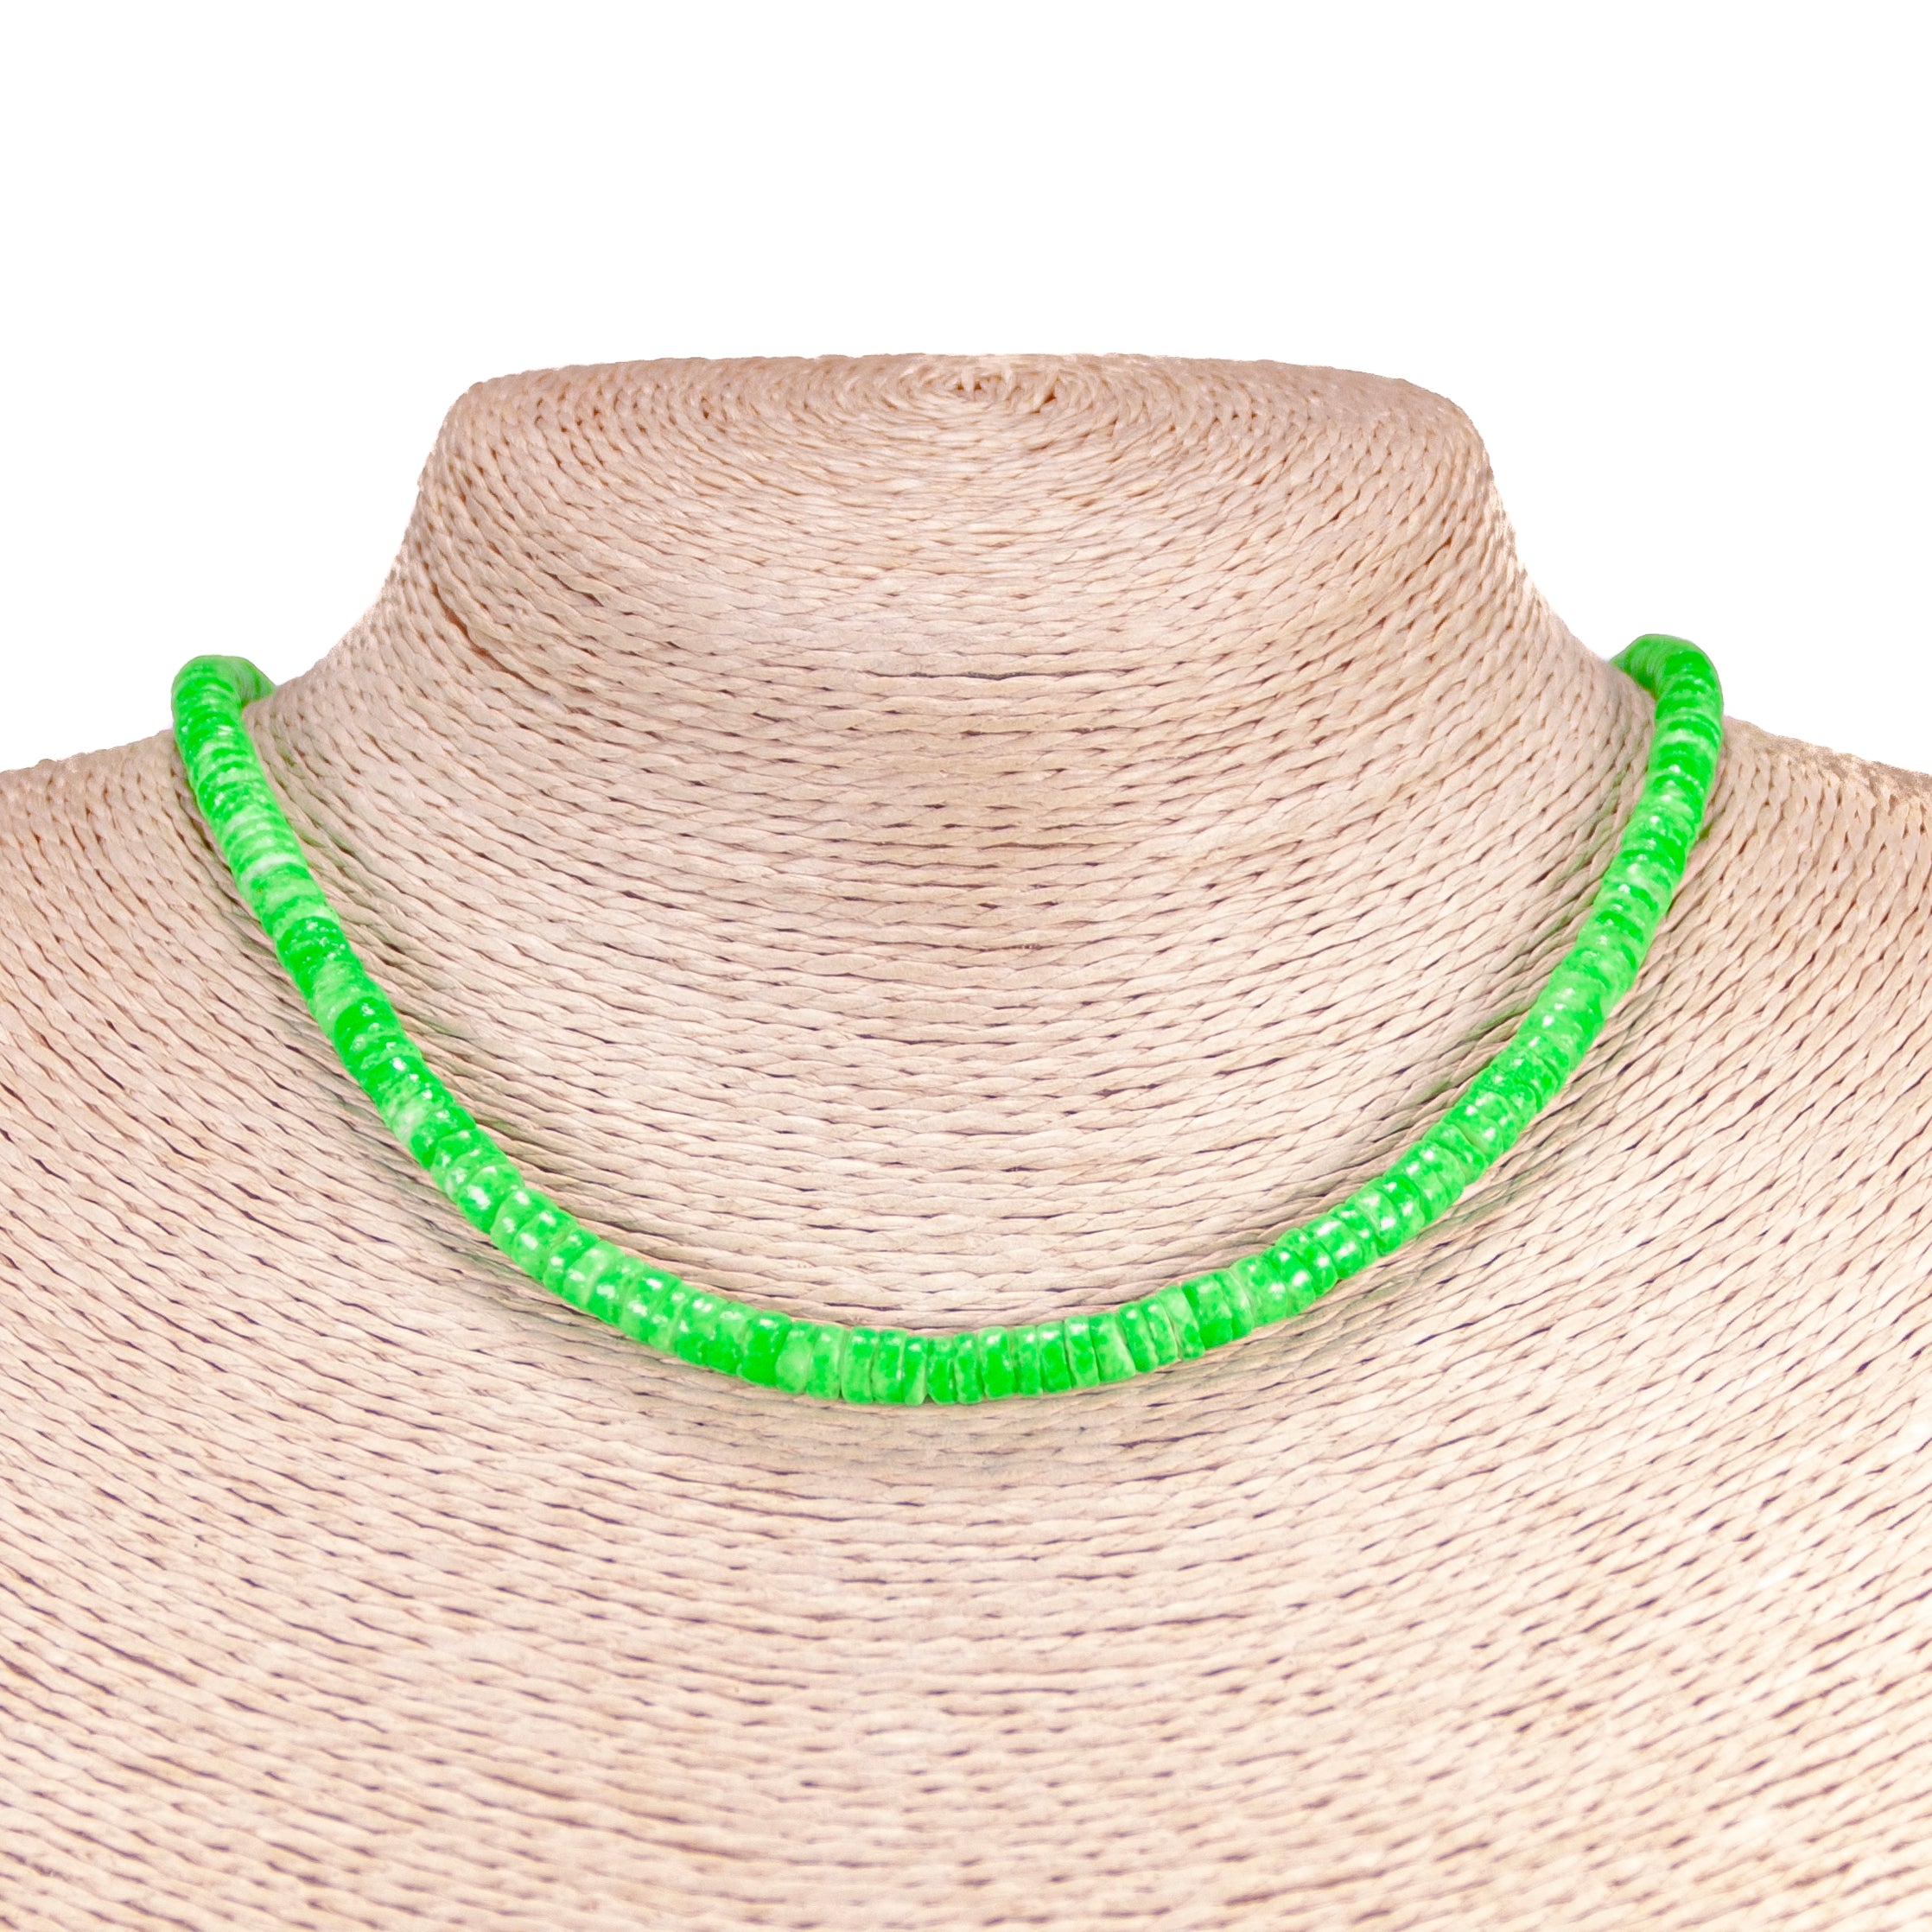 Neon Green Puka Shell Beads Necklace and Anklet Set